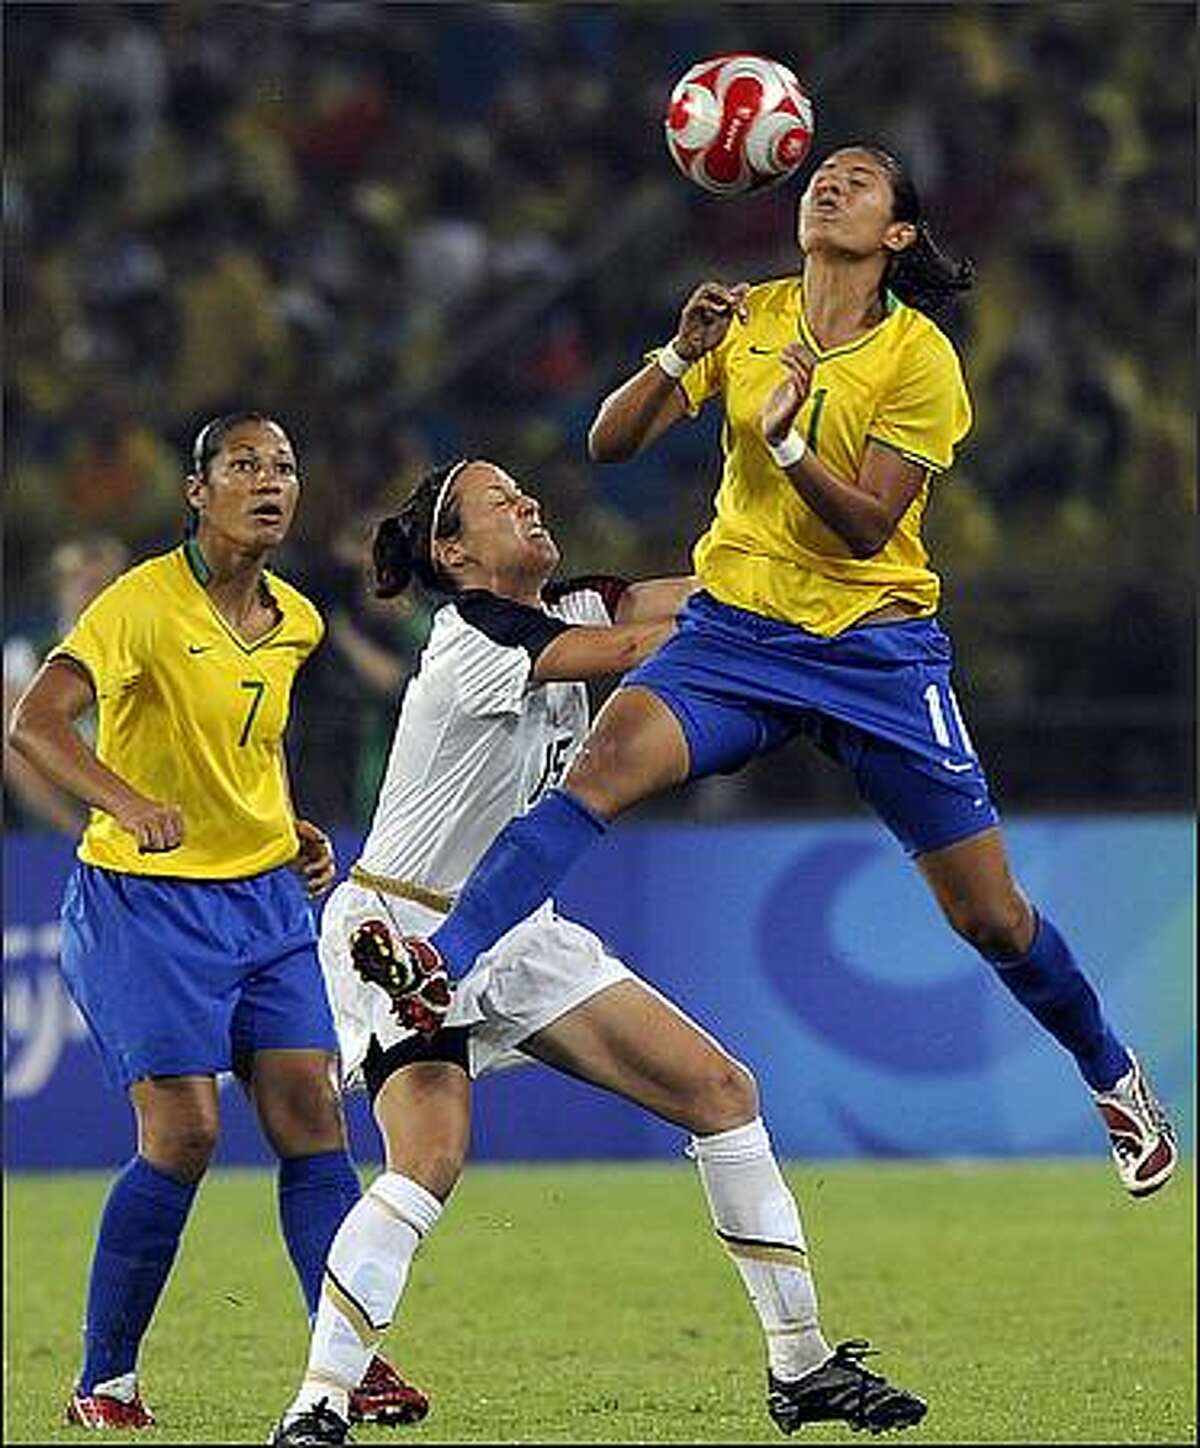 Brazil's Cristiane (R) vies for the ball with Kate Markgraf (C) of US while Brazil's Daniela looks on during the 2008 Beijing Olympic Games women's football Gold medal match at the Workers Stadium in Beijing.